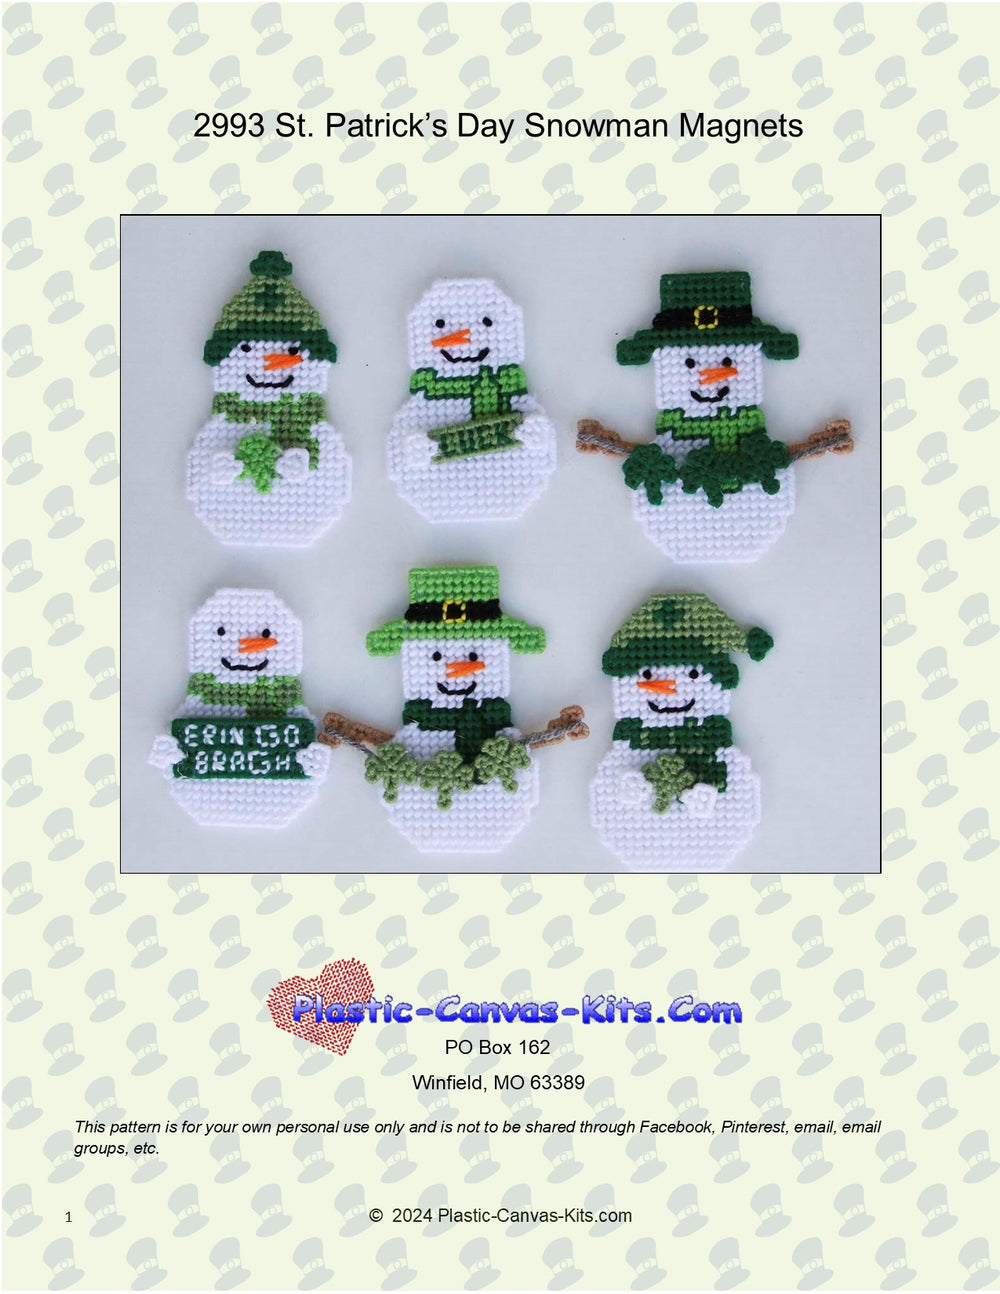 St. Patrick's Day Snowman Magnets